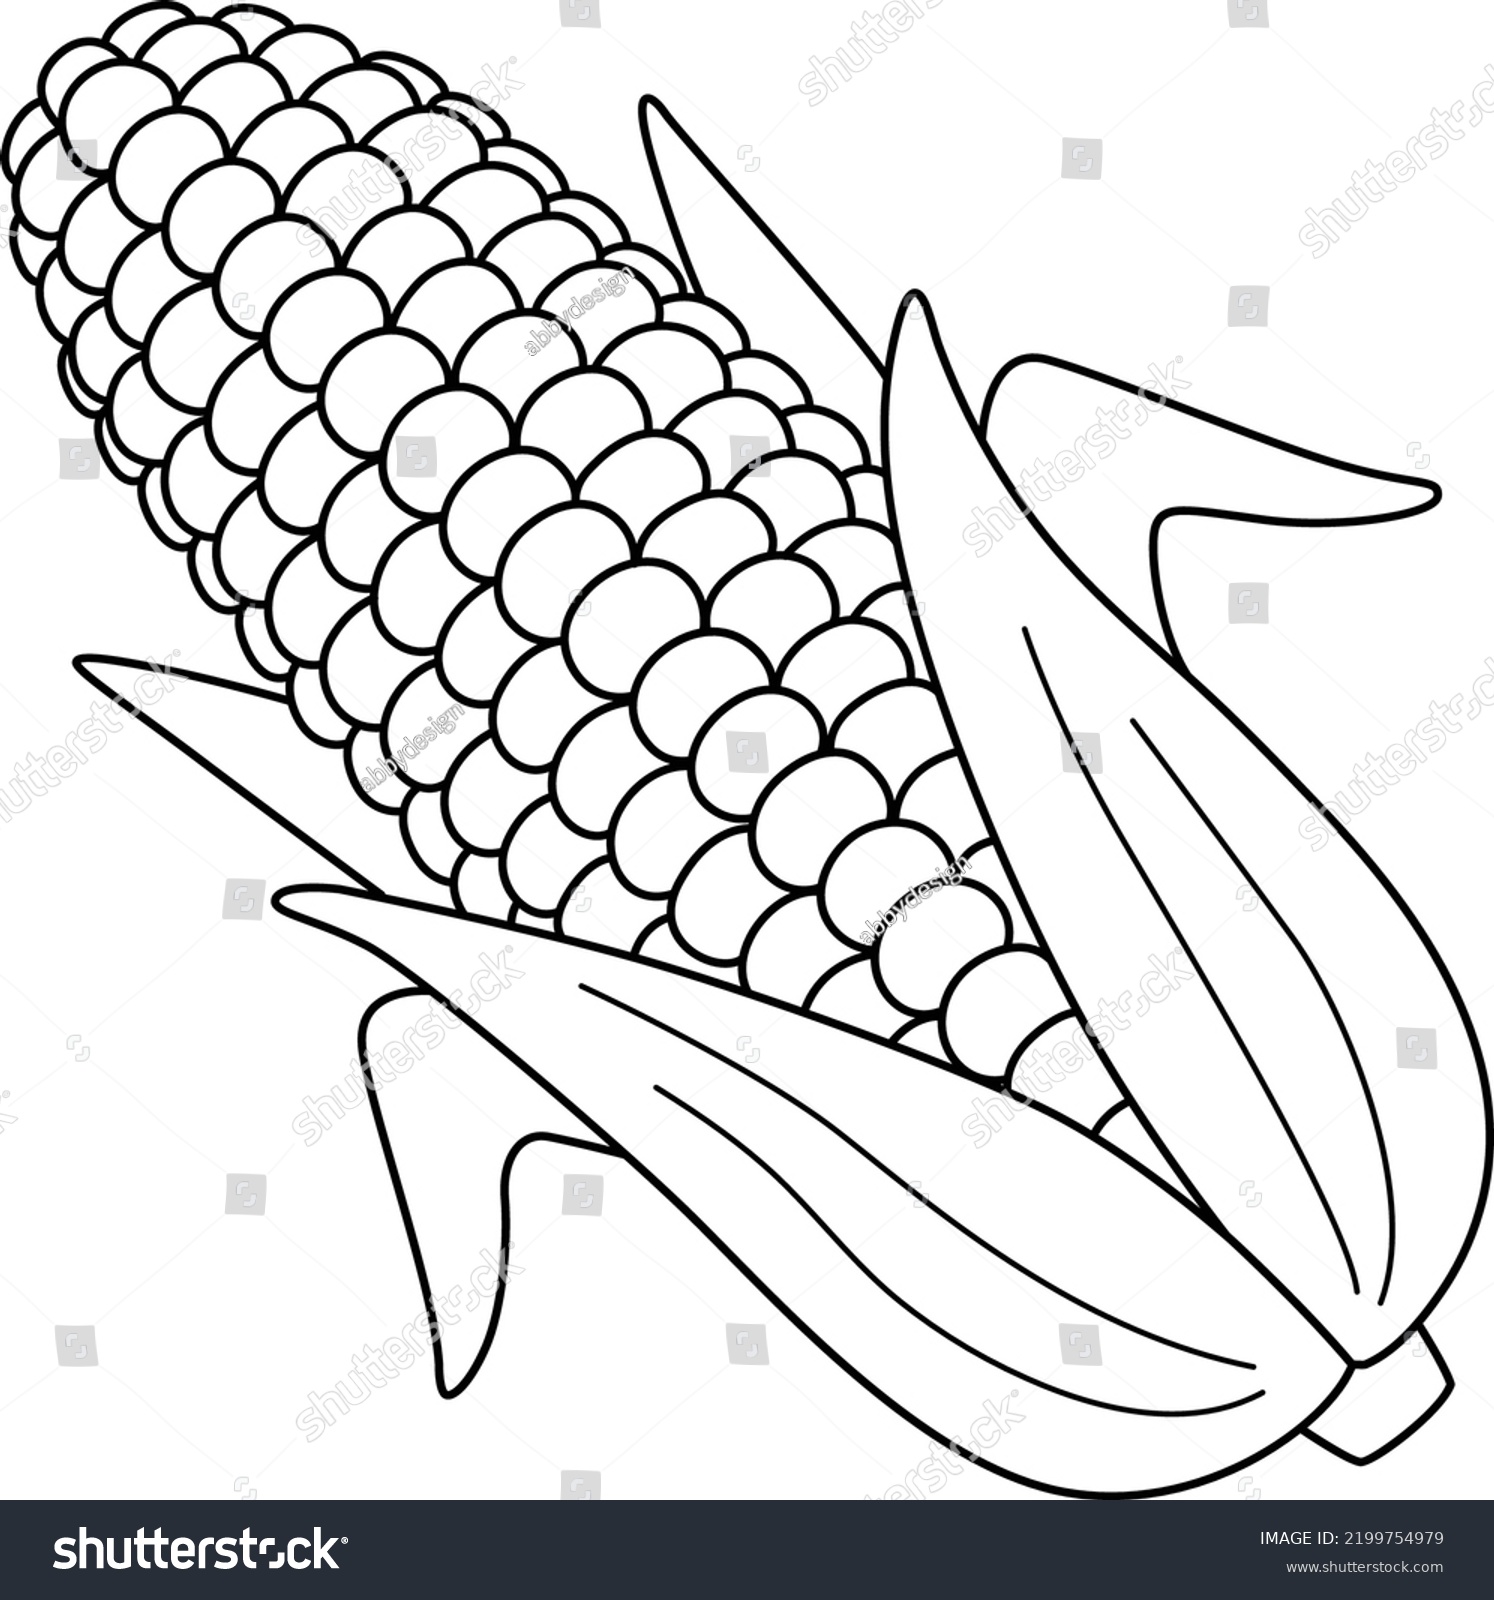 Thousand corn coloring page royalty